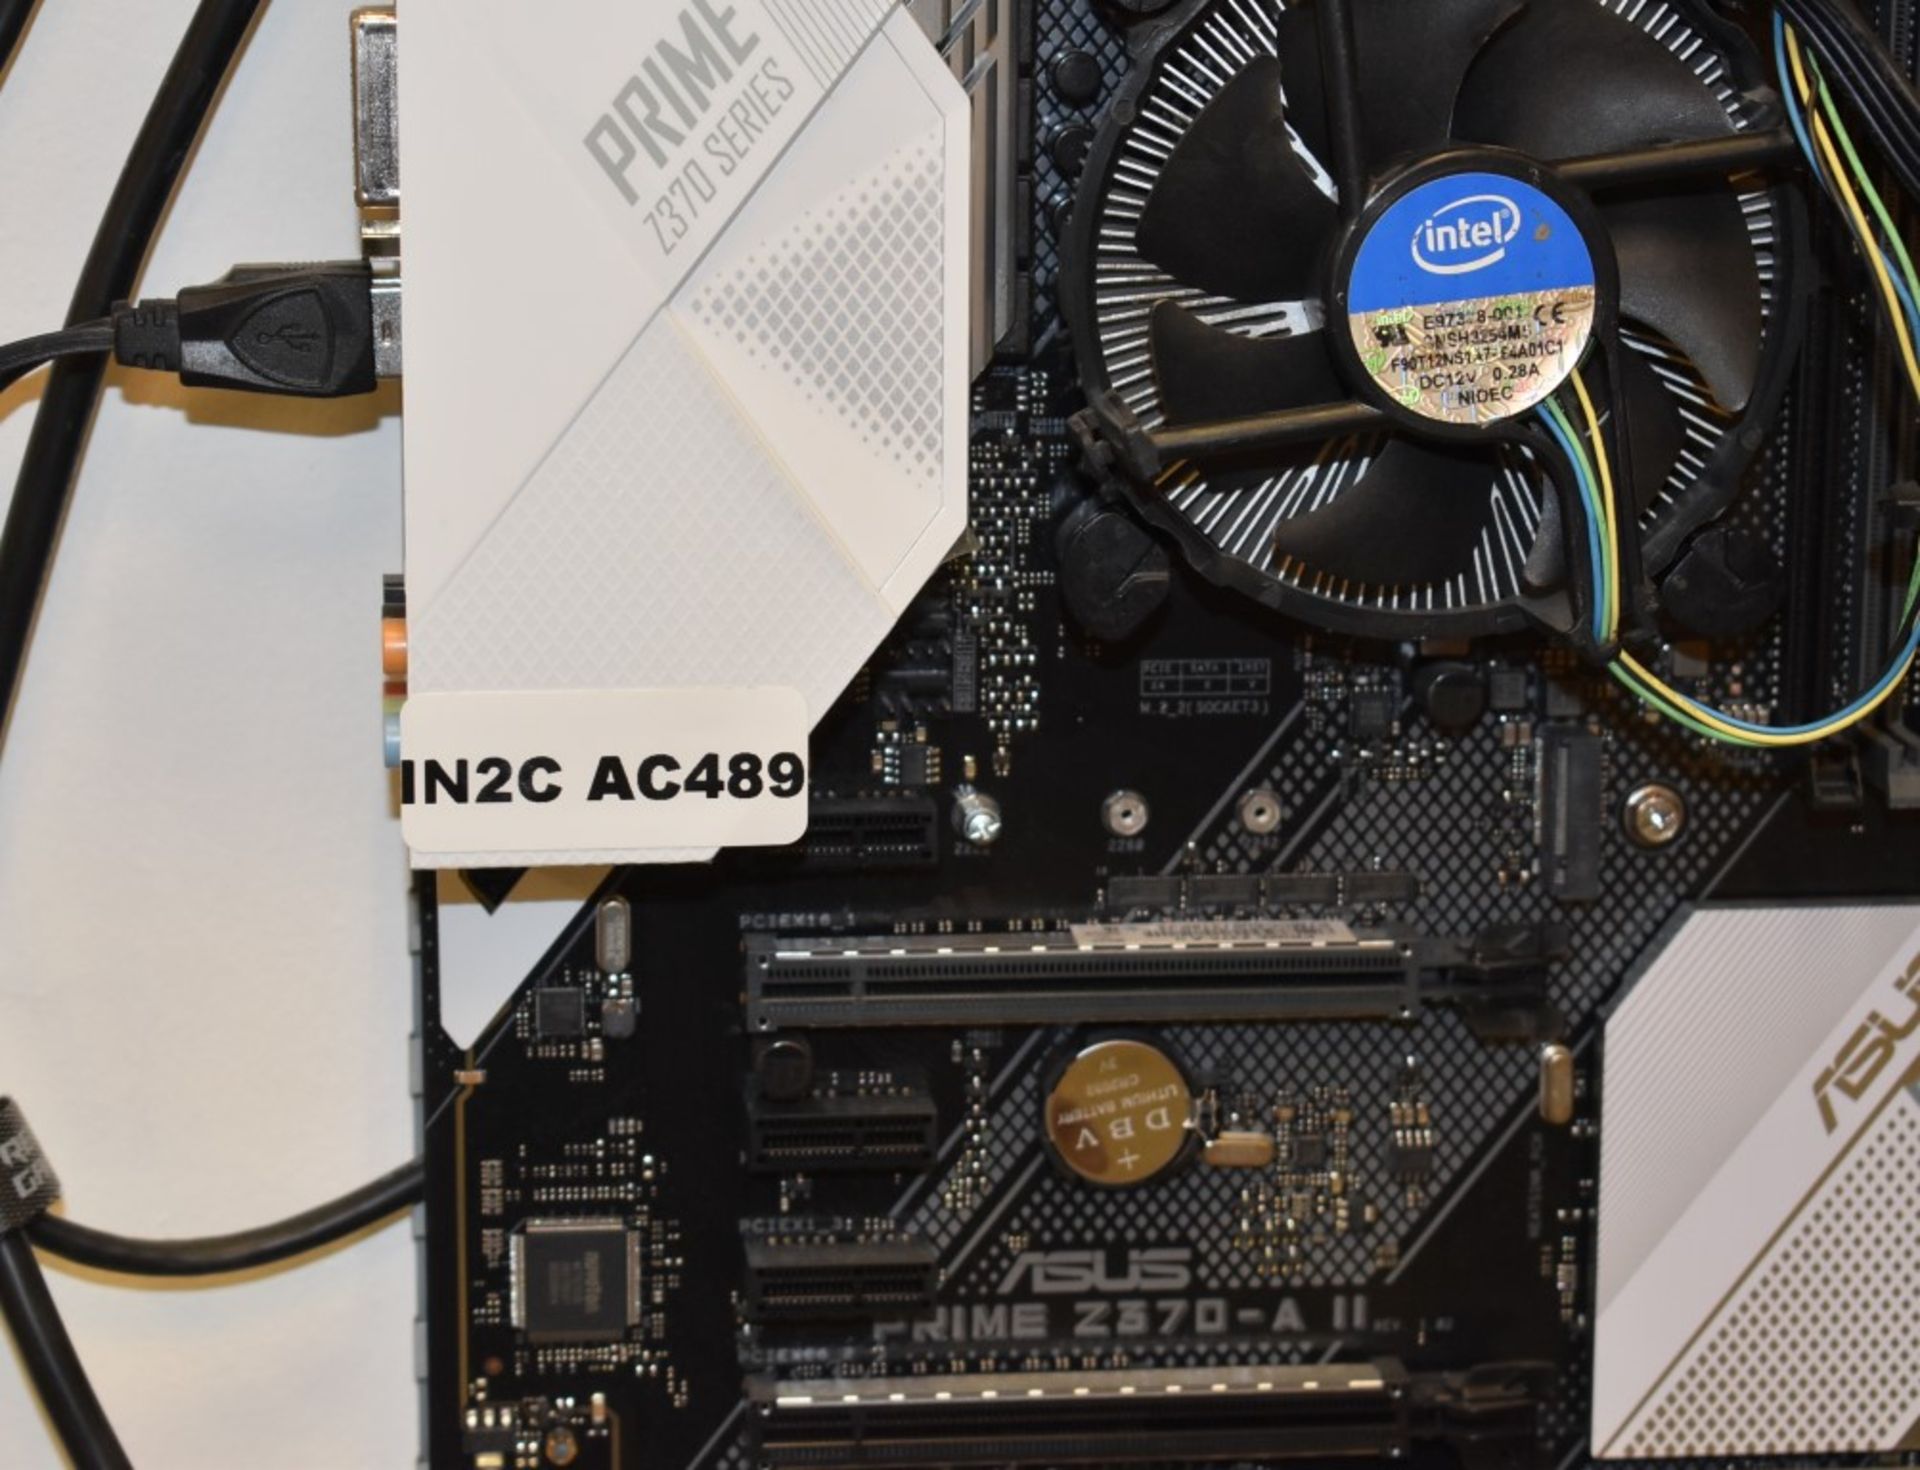 1 x Test Bench PC Components Including an Asus Prime Z370-A II Motherboard & Intel i3-8100 CPU - Image 10 of 18